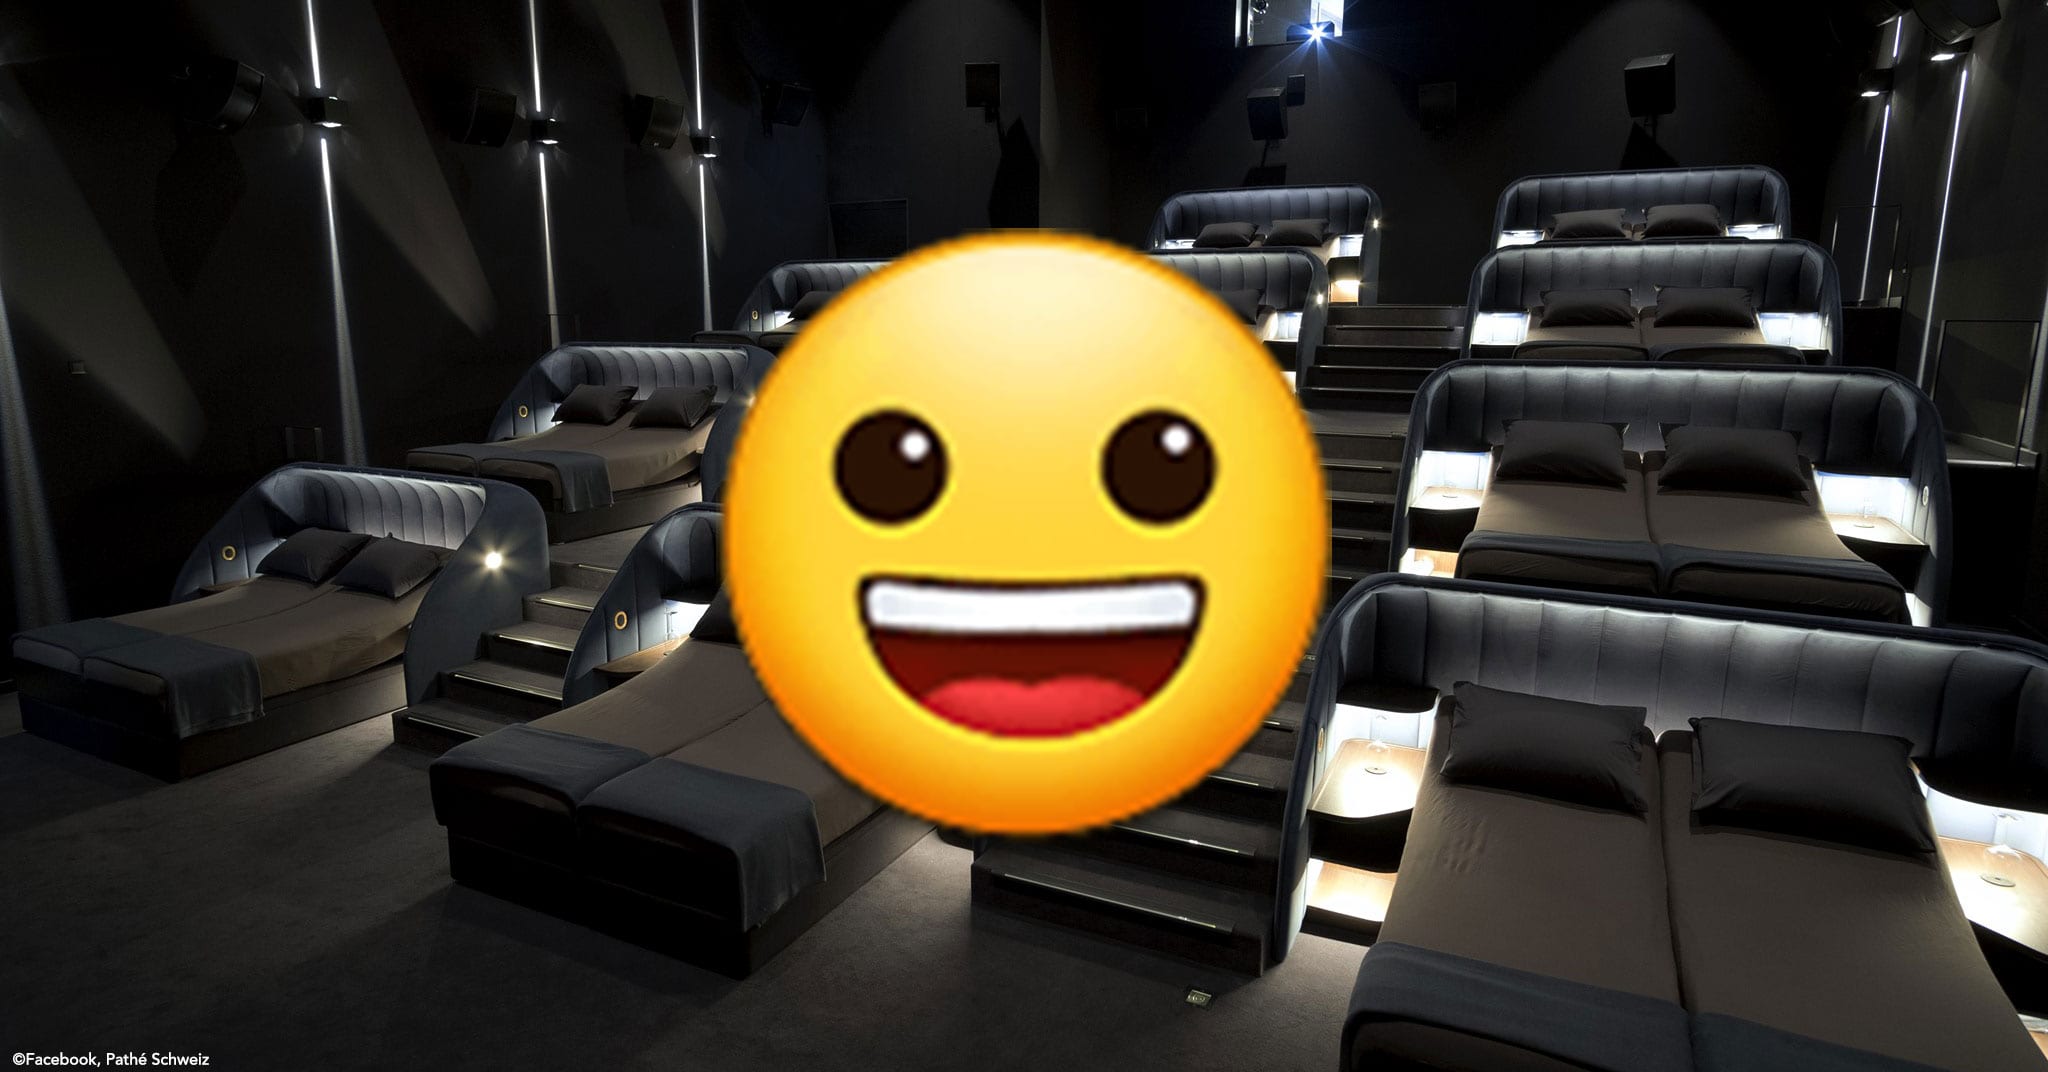 This Swiss Movie Theater Has Beds Instead of Seats, so Just Take My Money